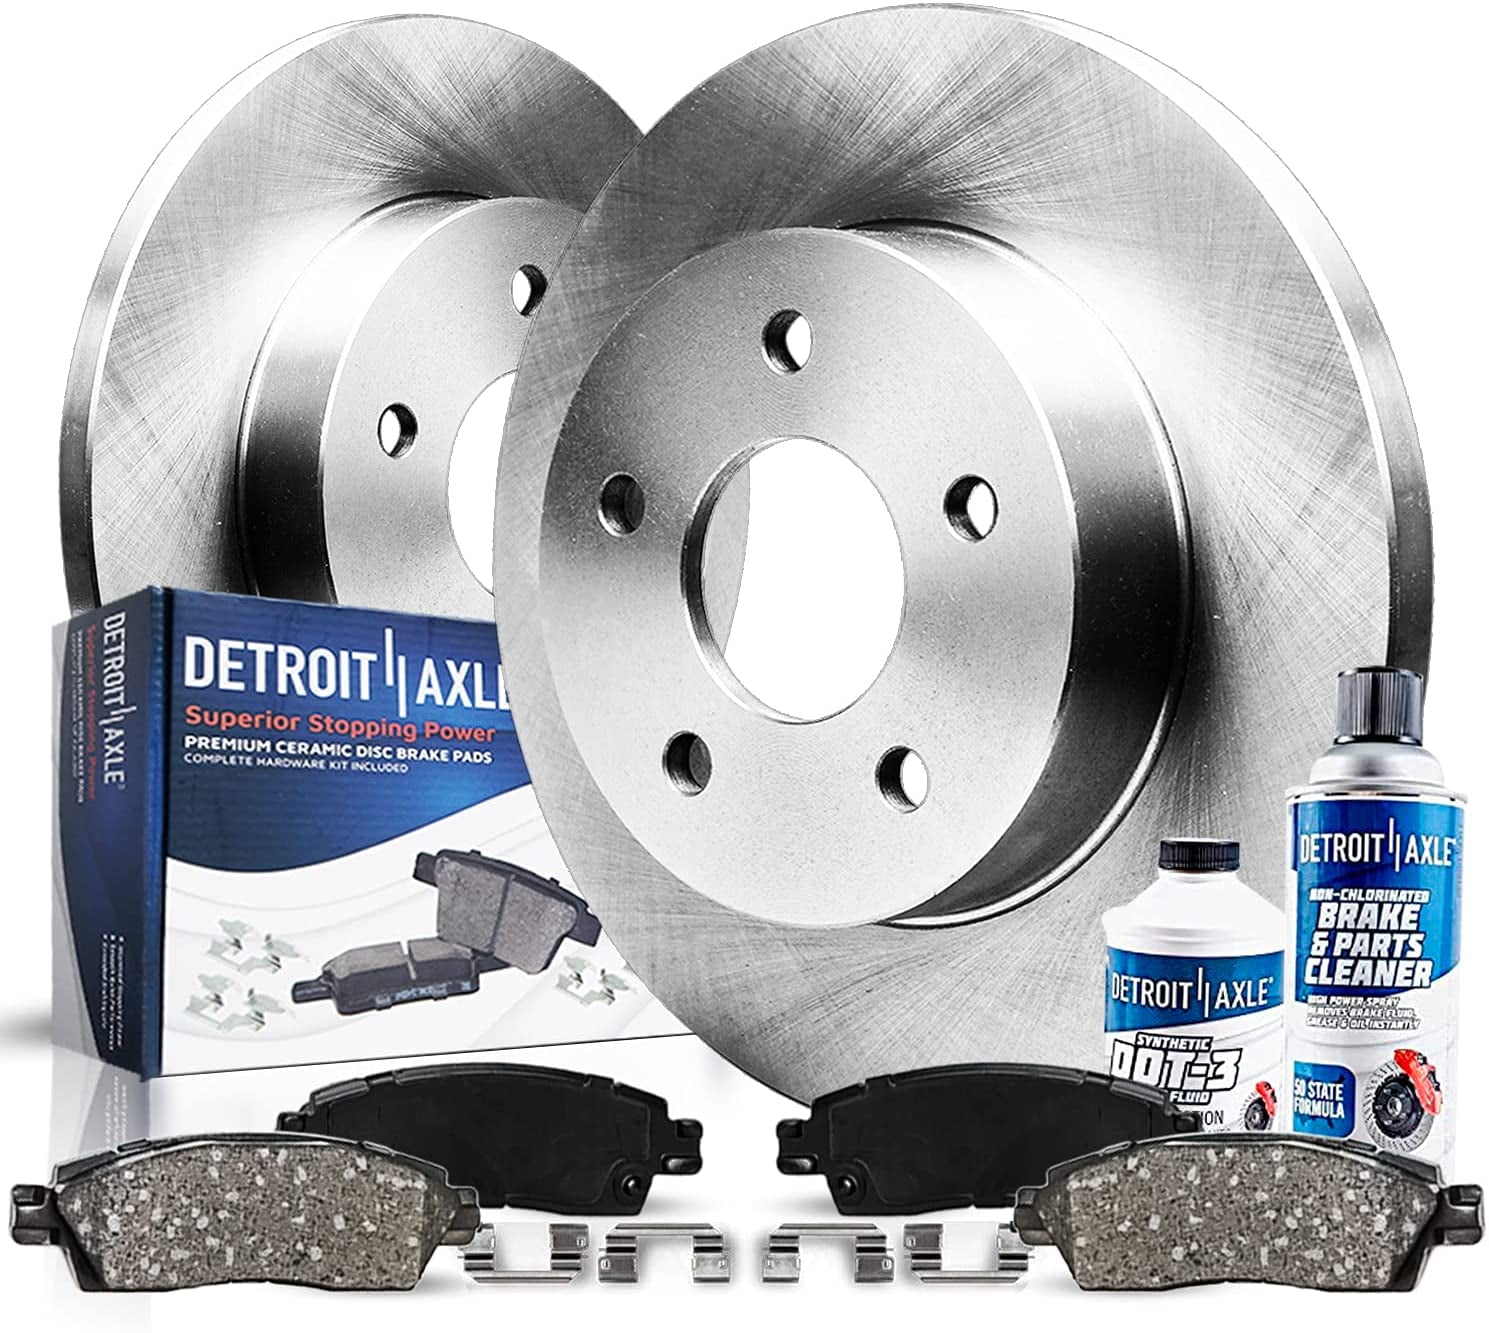 Detroit Axle Rear 328mm Disc Replacement Rotors Ceramic Pads with Hardware Replacement for 2012 2013 2014 2015 2016 2017 2018 2019 Town & Country Dodge Grand Caravan Dodge Journey 